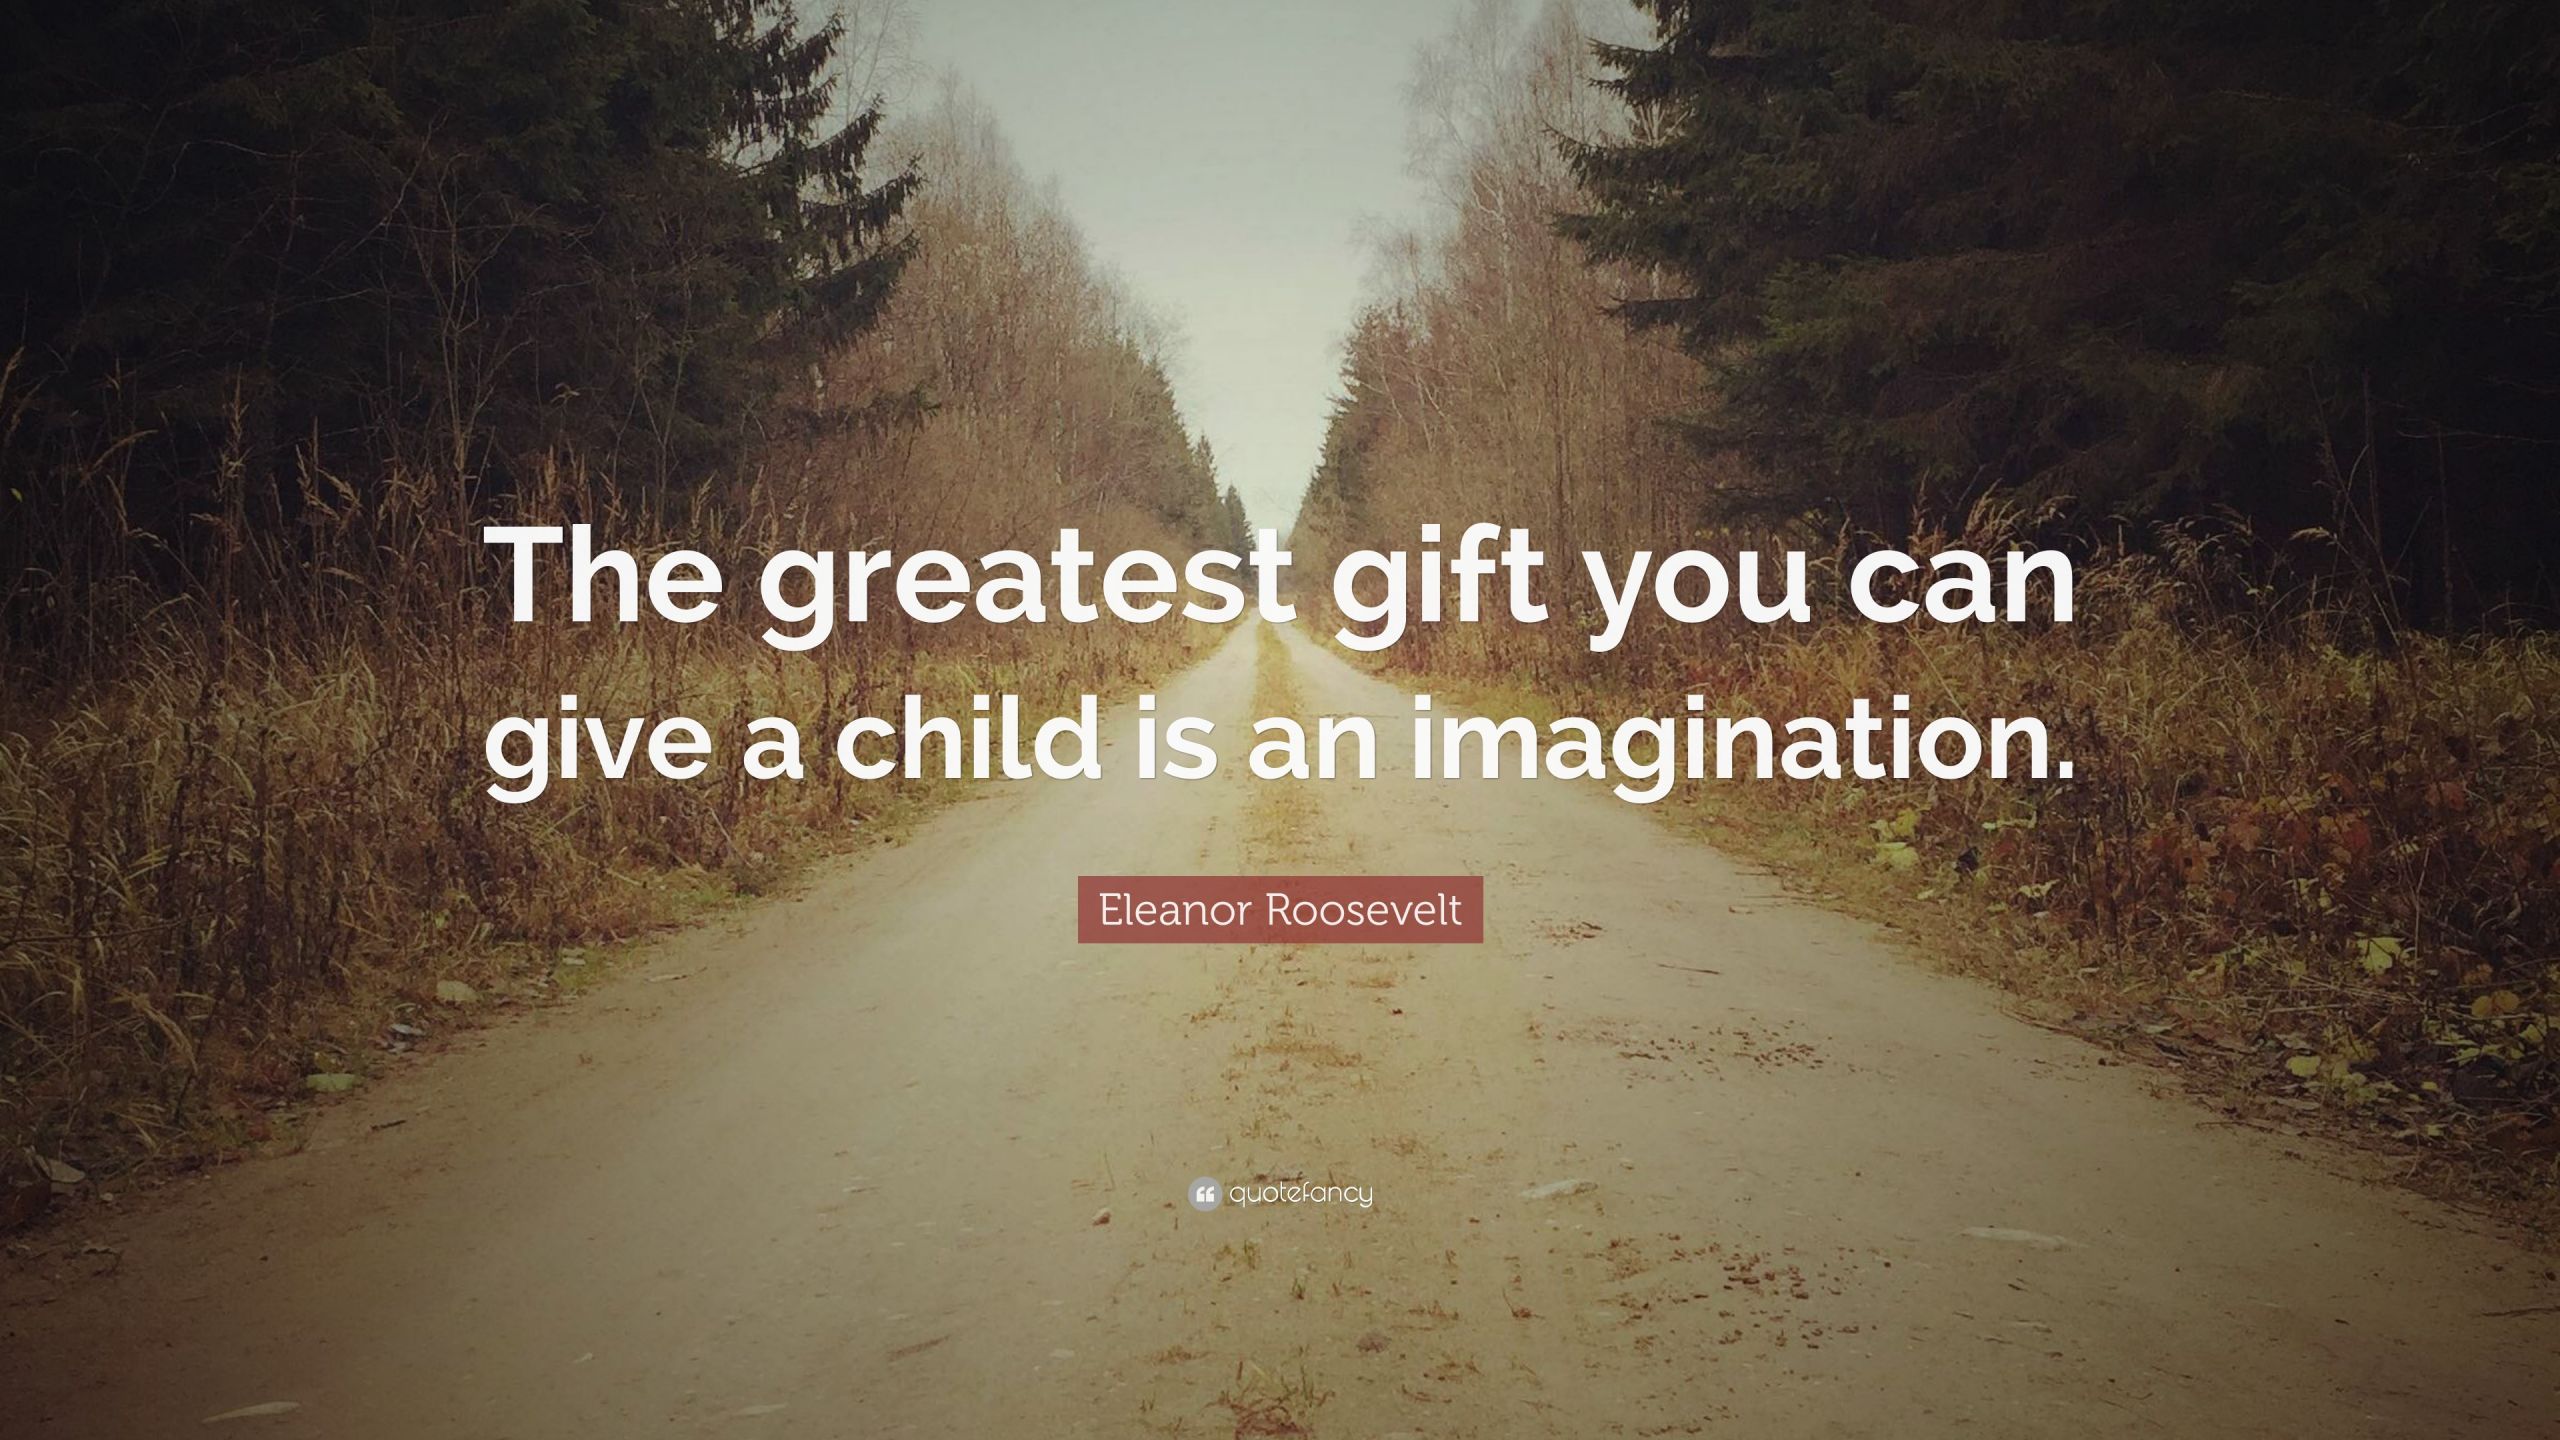 Kids Imagination Quotes
 Eleanor Roosevelt Quote “The greatest t you can give a